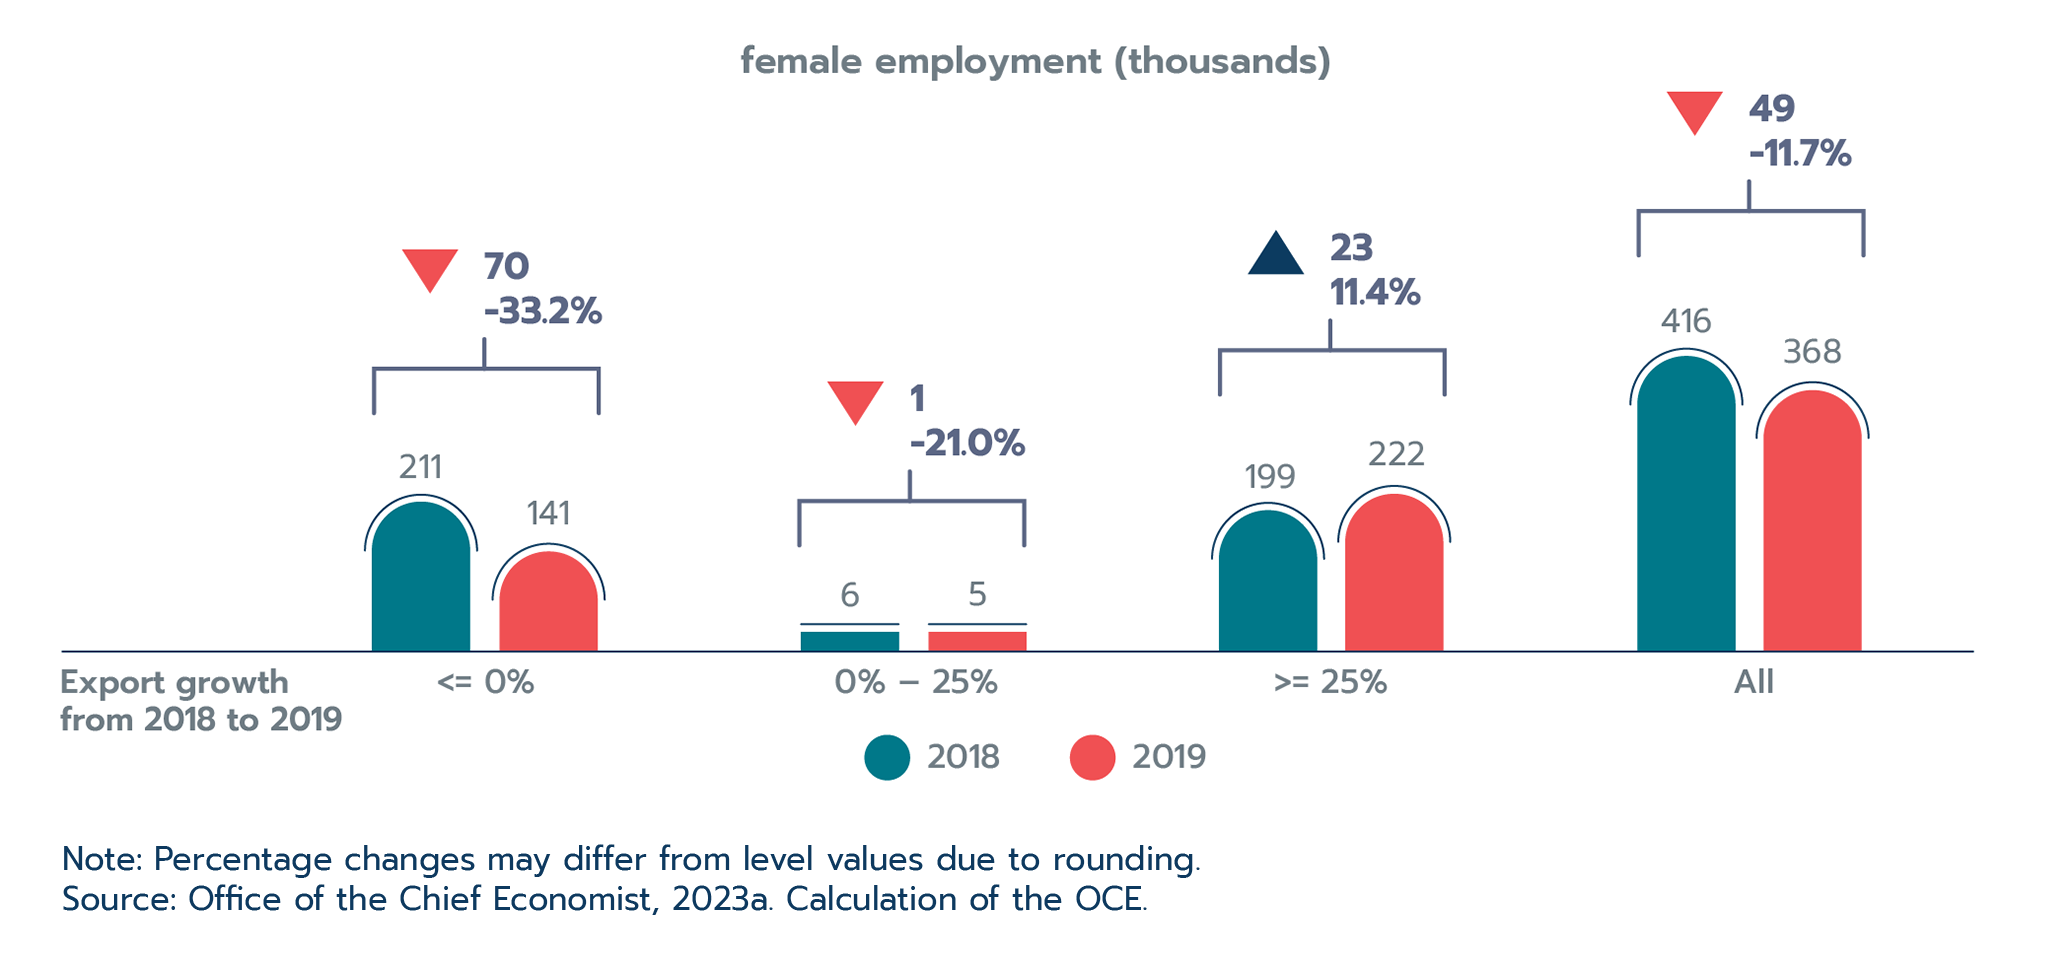 Figure 2.14: Female employment in firms that exported to new CPTPP markets from 2018 to 2019, by size of export growth 